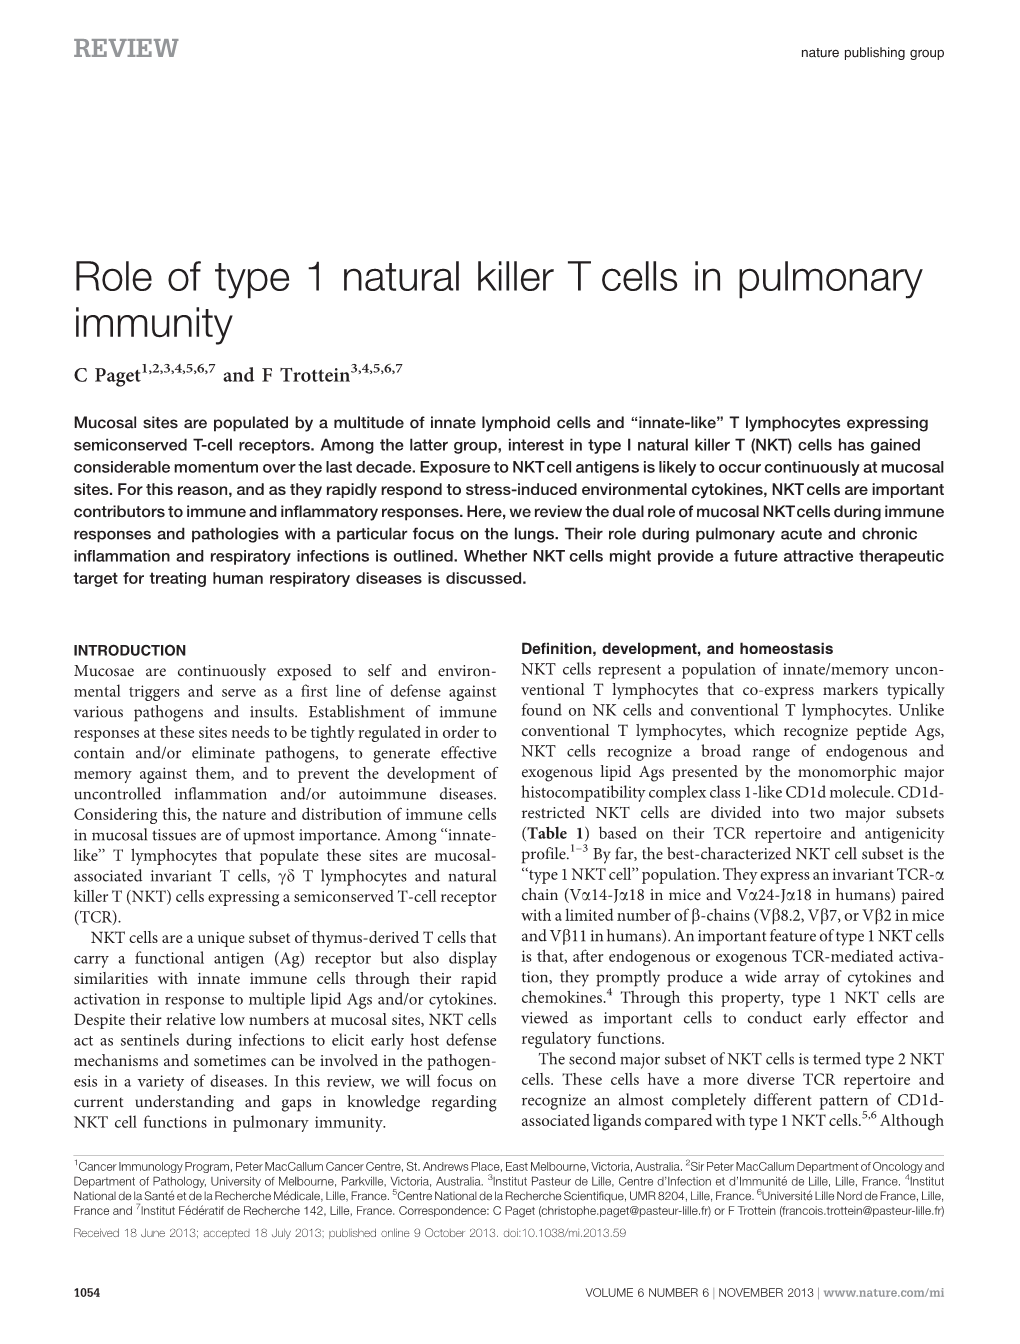 Role of Type 1 Natural Killer T Cells in Pulmonary Immunity